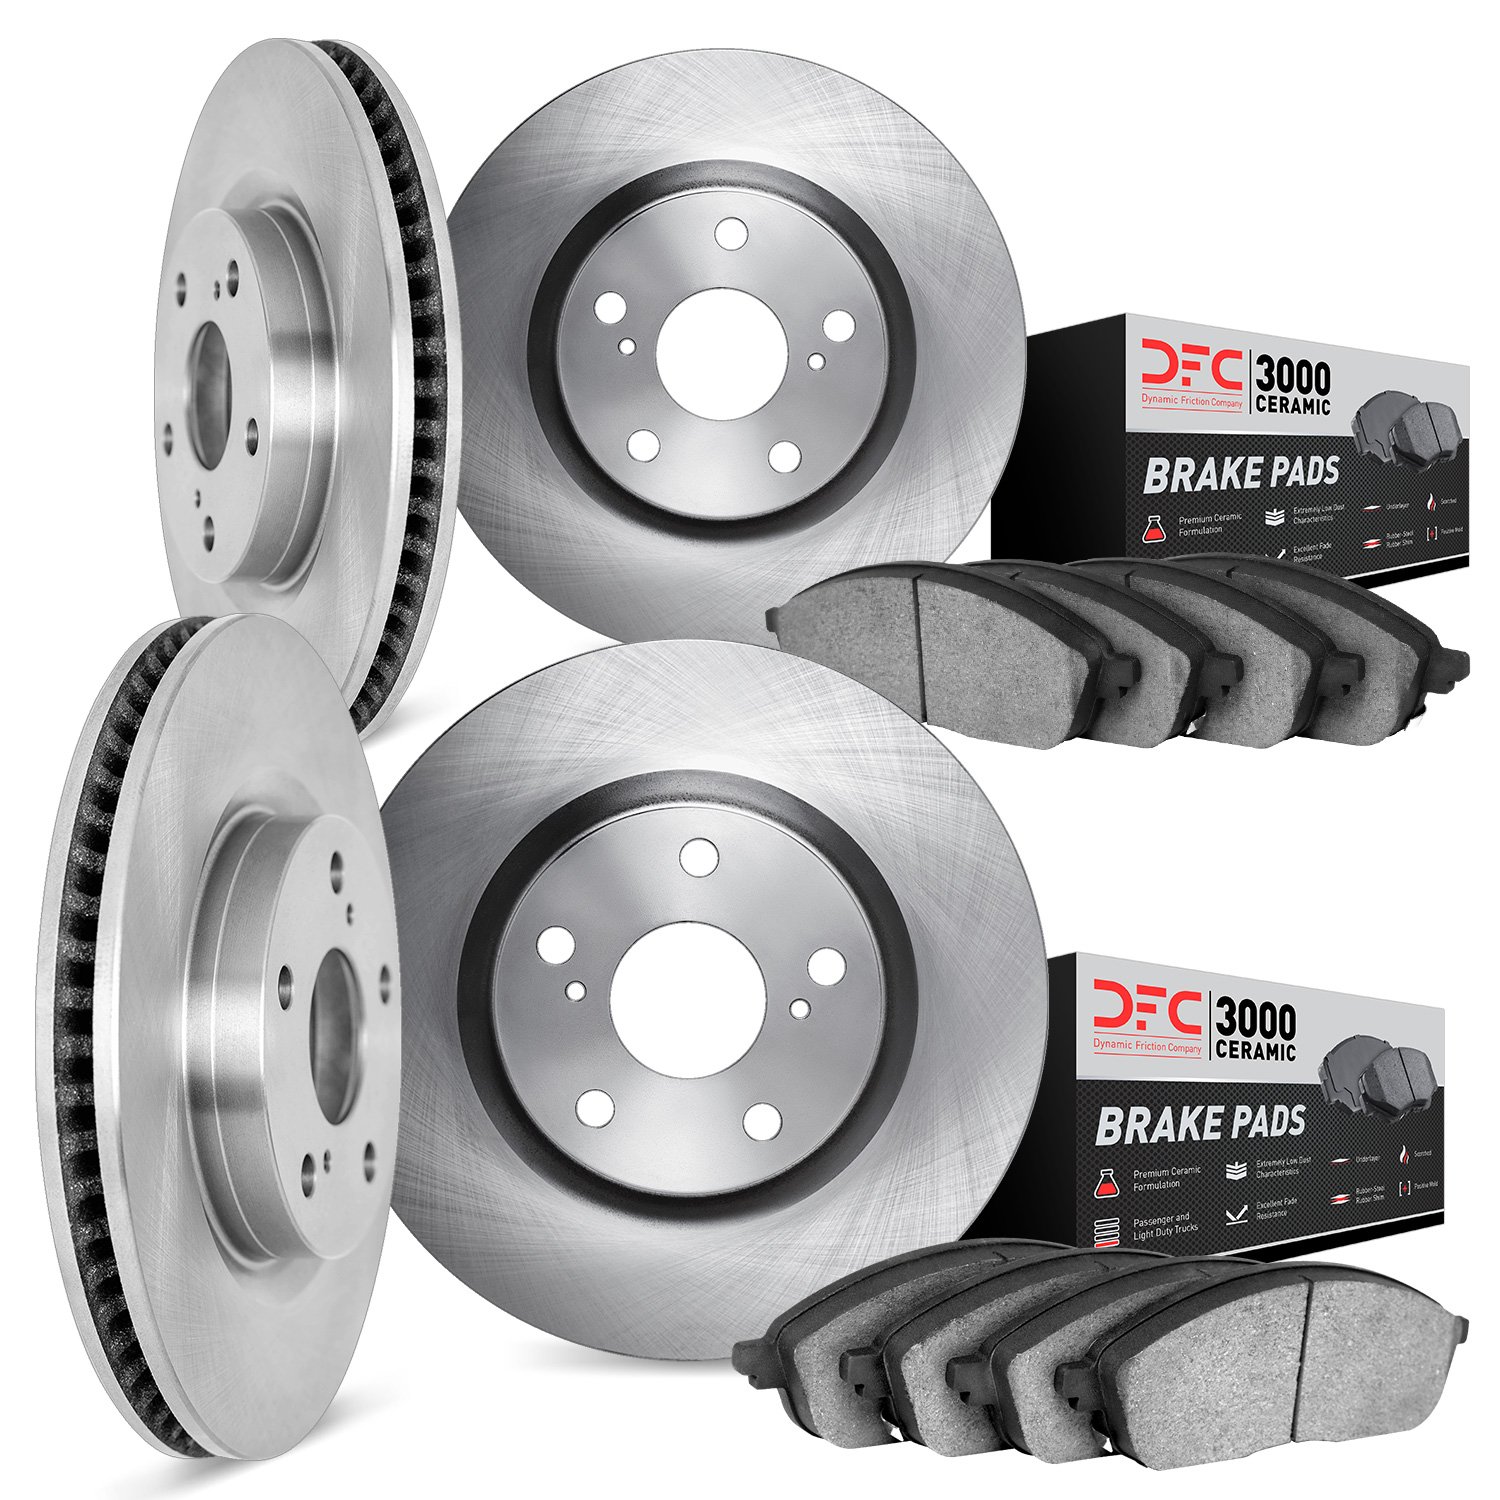 6304-31061 Brake Rotors with 3000-Series Ceramic Brake Pads Kit, 2006-2007 BMW, Position: Front and Rear